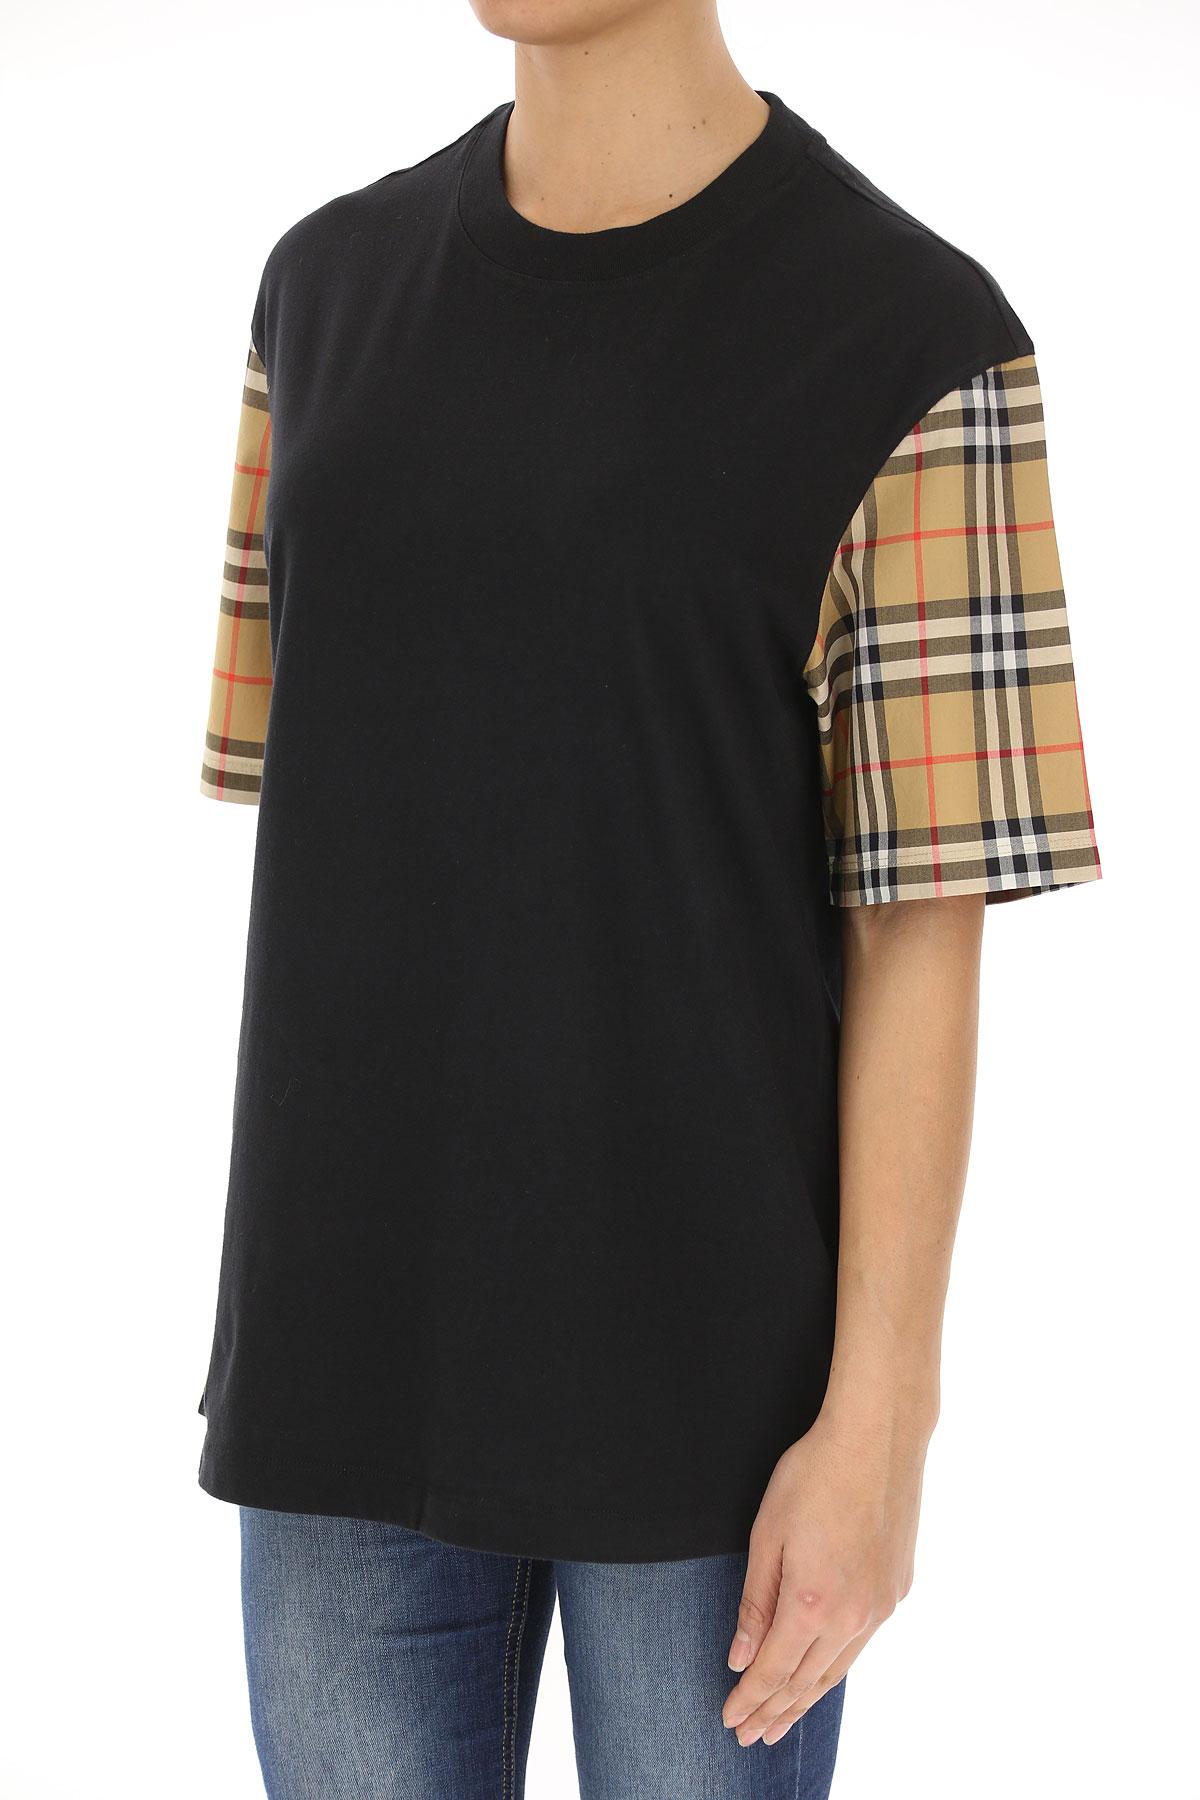 Burberry T-shirt For Women On Sale in 